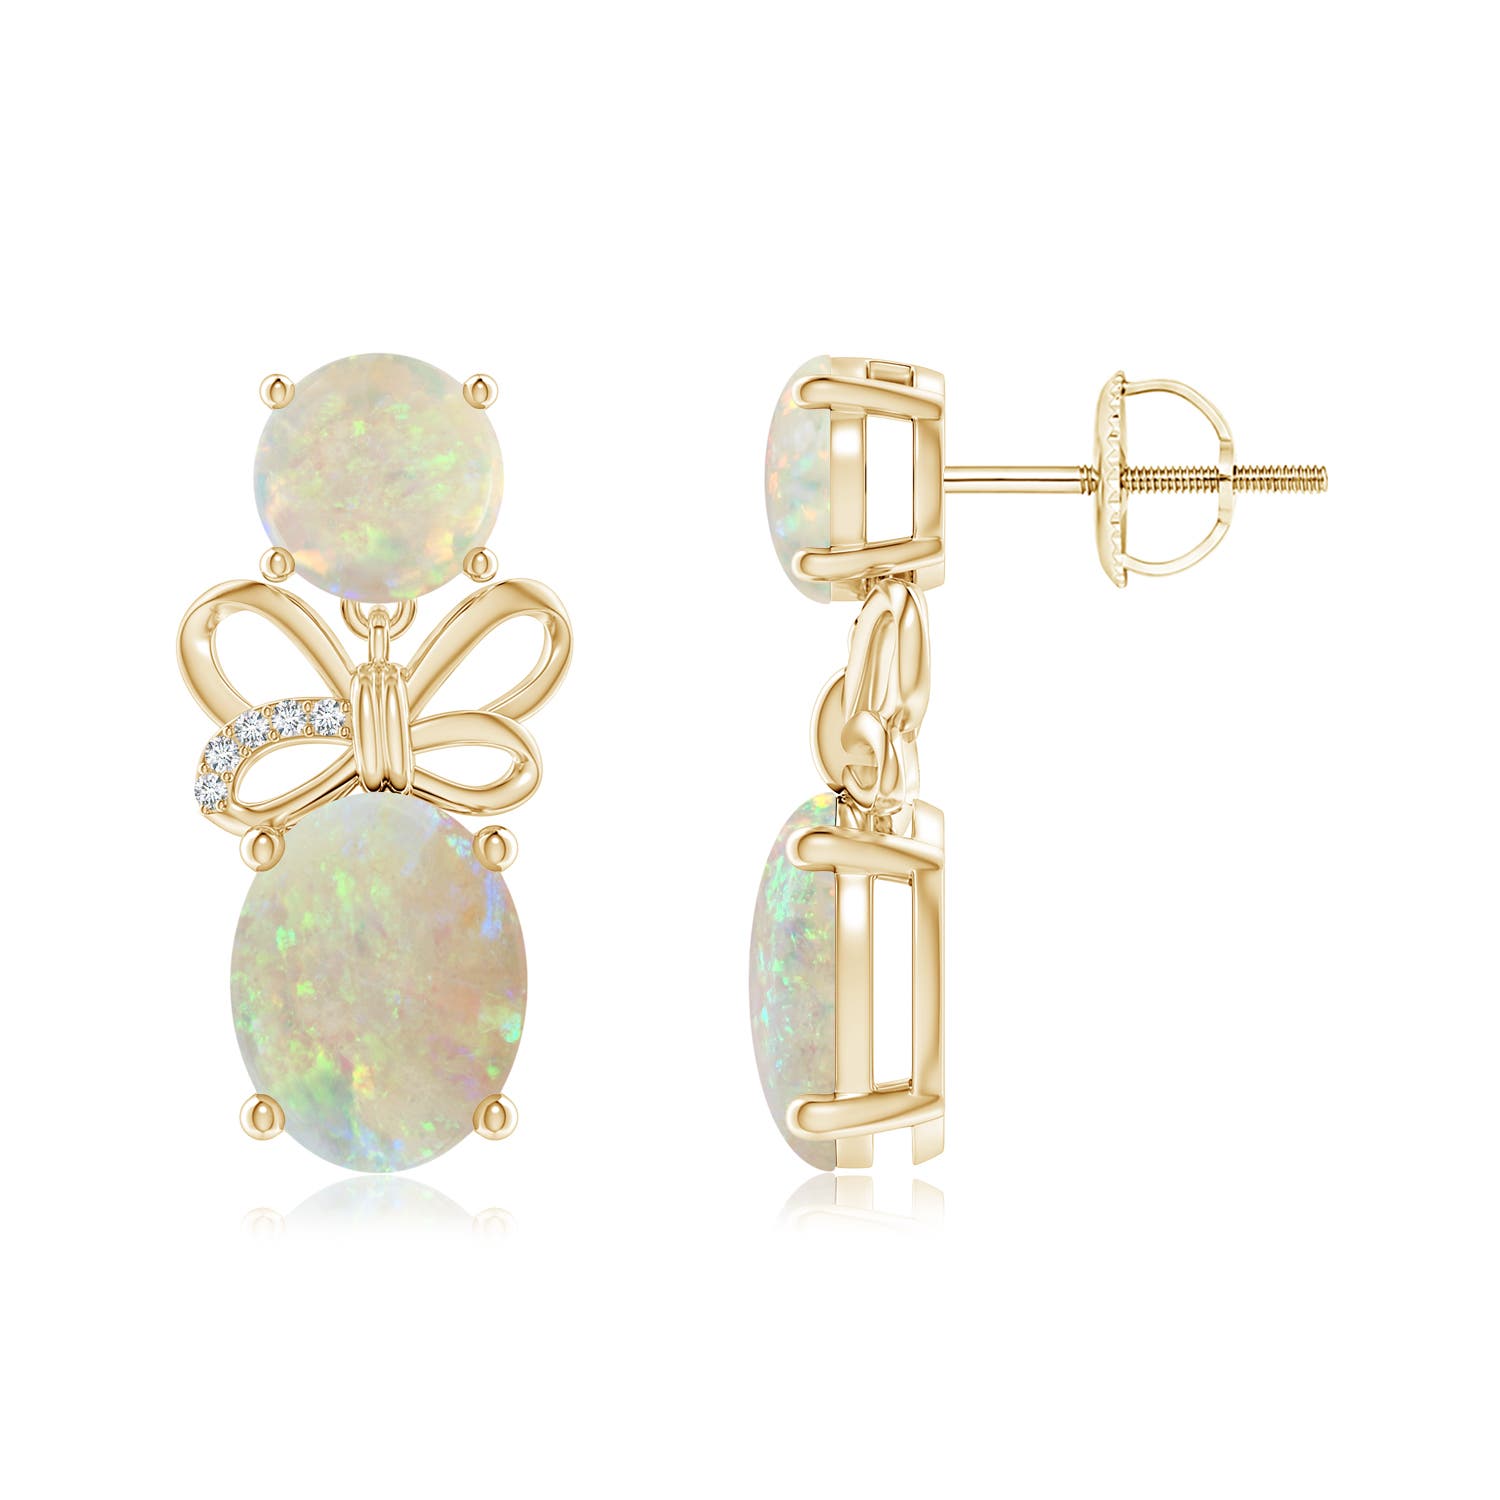 AAA - Opal / 3.24 CT / 14 KT Yellow Gold